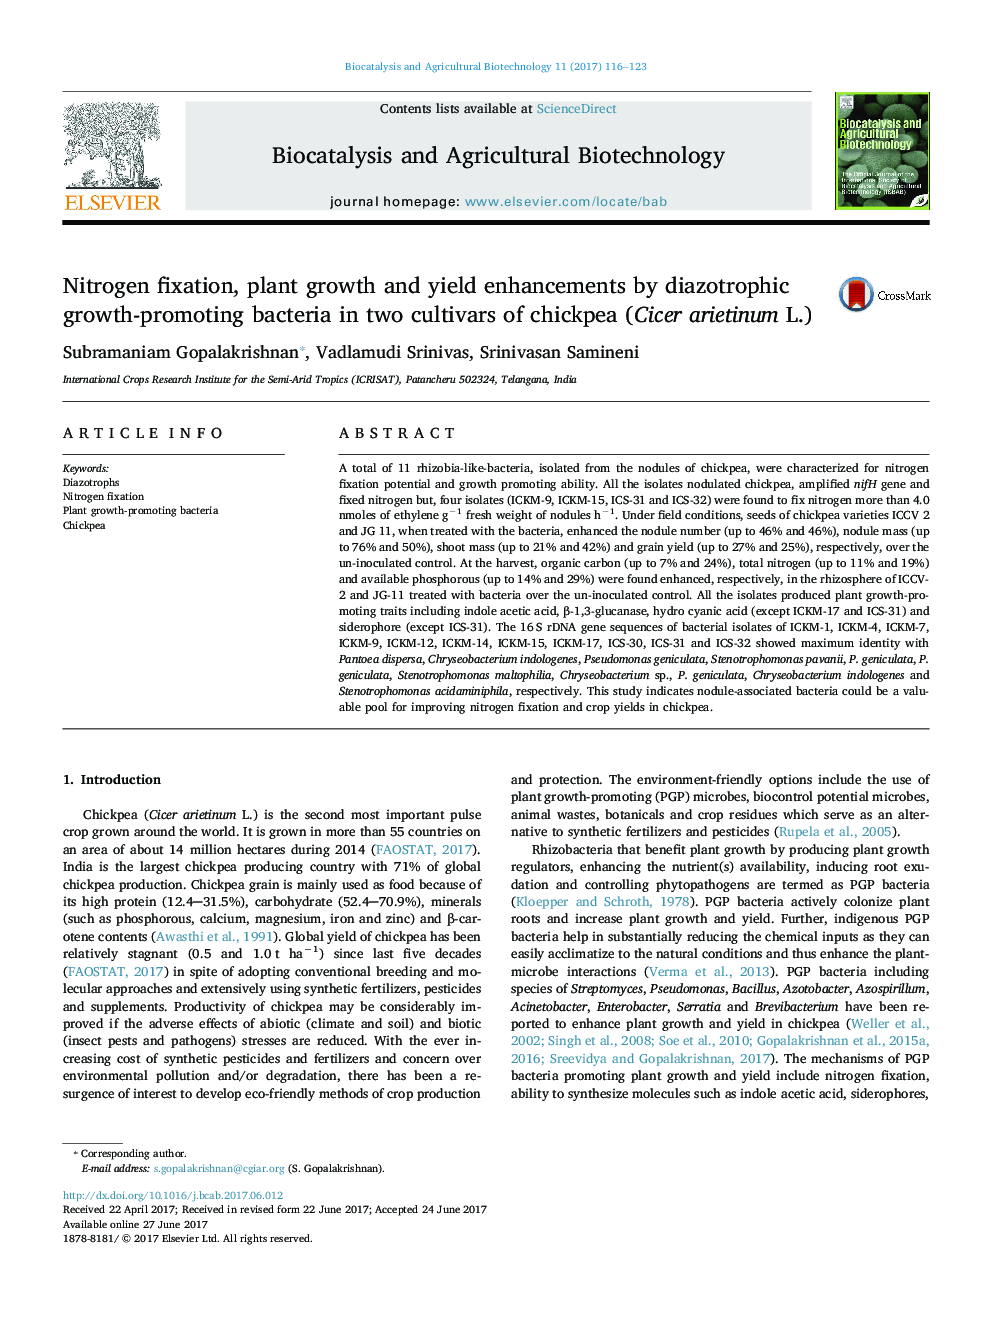 Nitrogen fixation, plant growth and yield enhancements by diazotrophic growth-promoting bacteria in two cultivars of chickpea (Cicer arietinum L.)